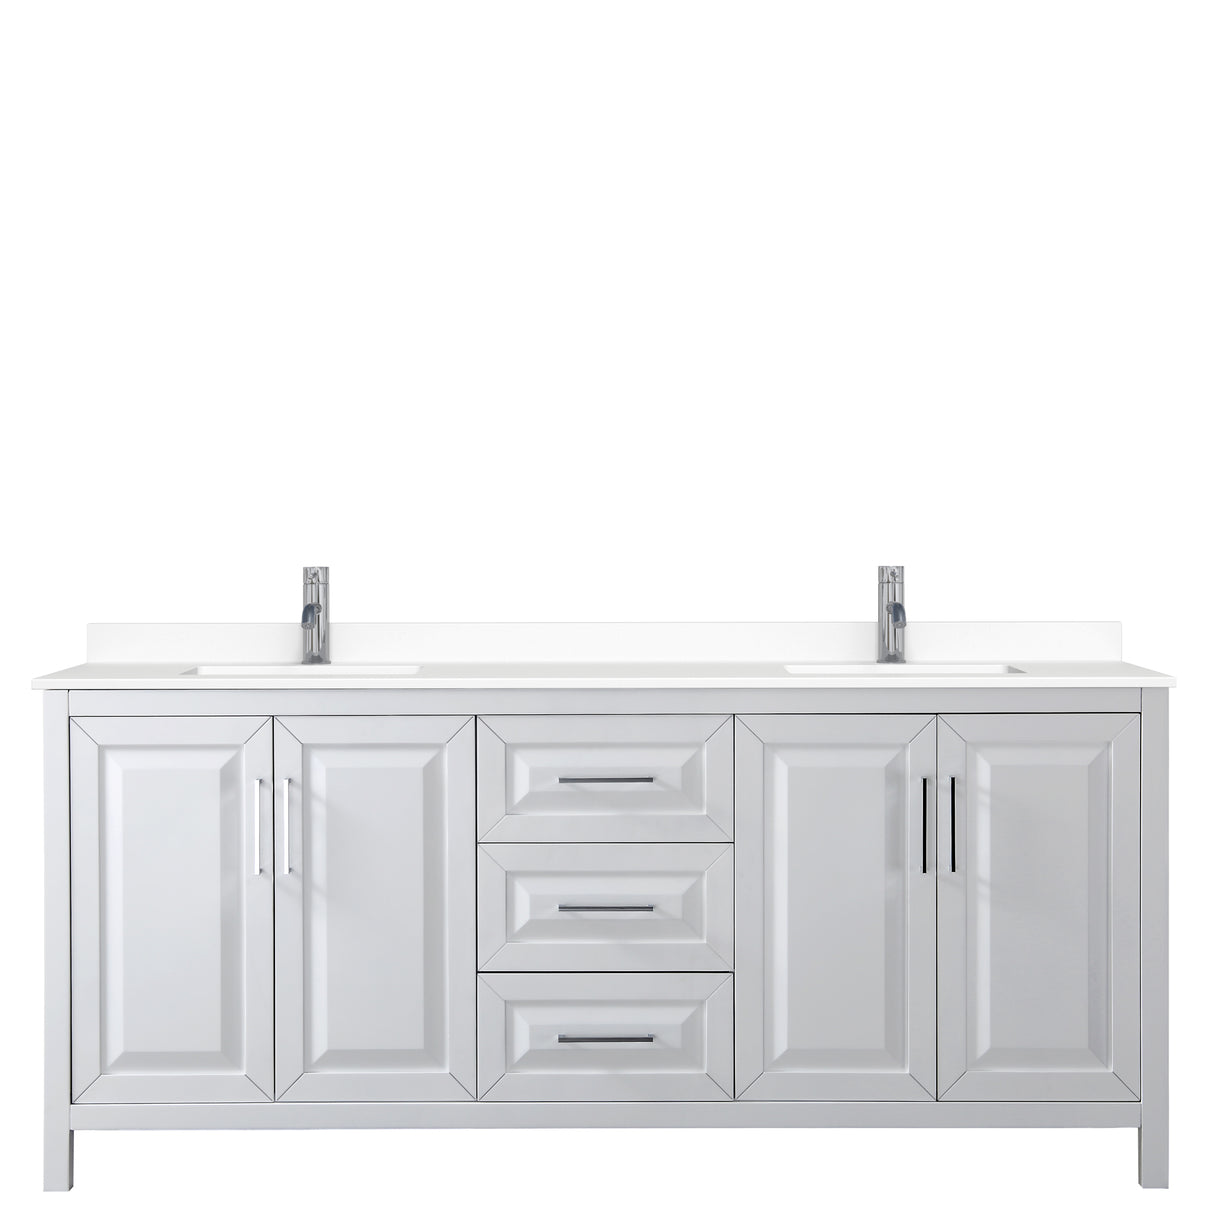 Daria 80 Inch Double Bathroom Vanity in White White Cultured Marble Countertop Undermount Square Sinks No Mirror